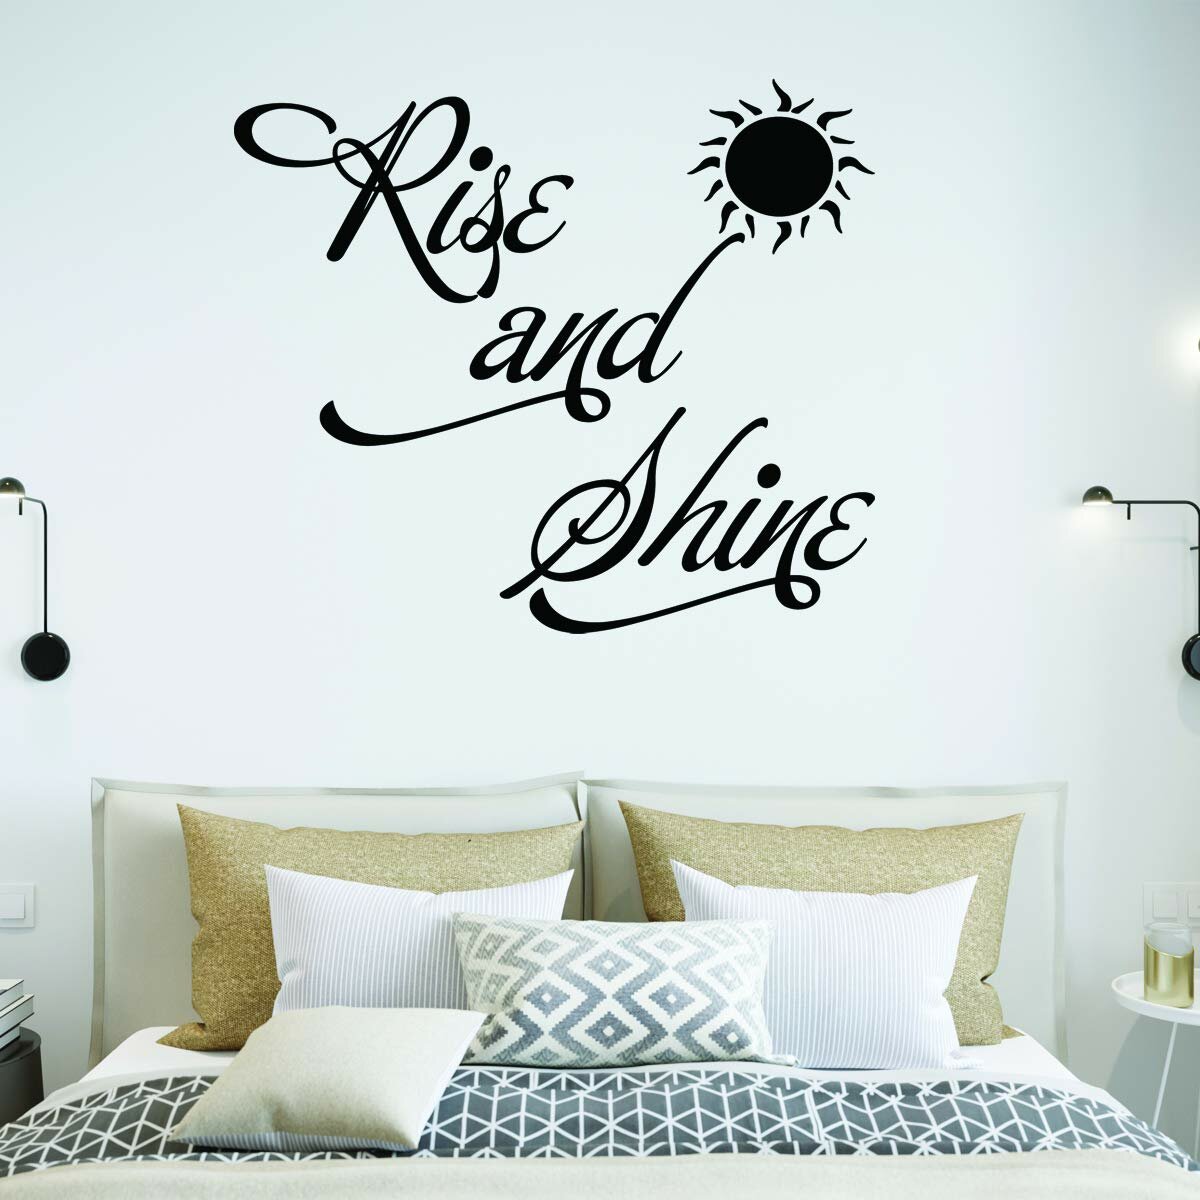 Learn From the Past Wall Quotes™ Decal